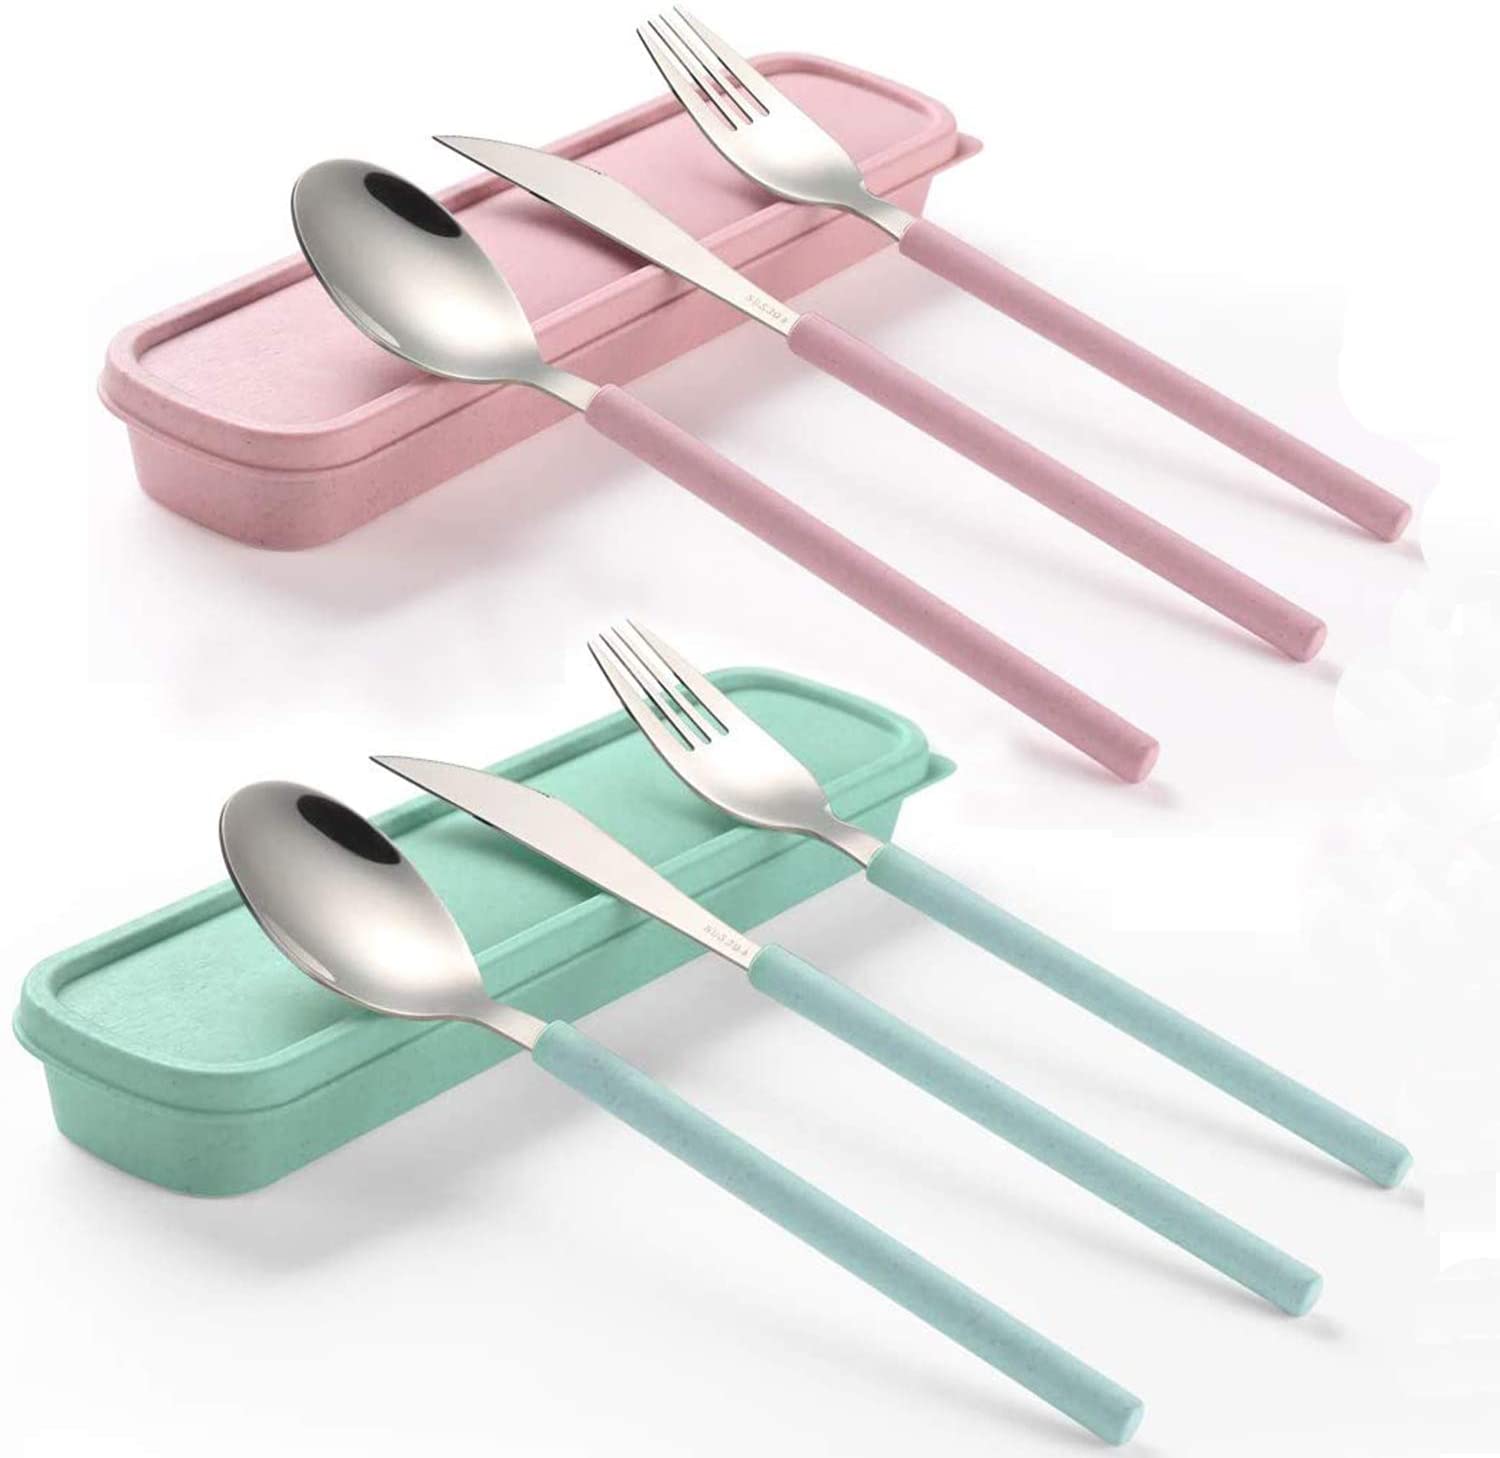 Portable Utensils, stainless steel and wheat straw utensils